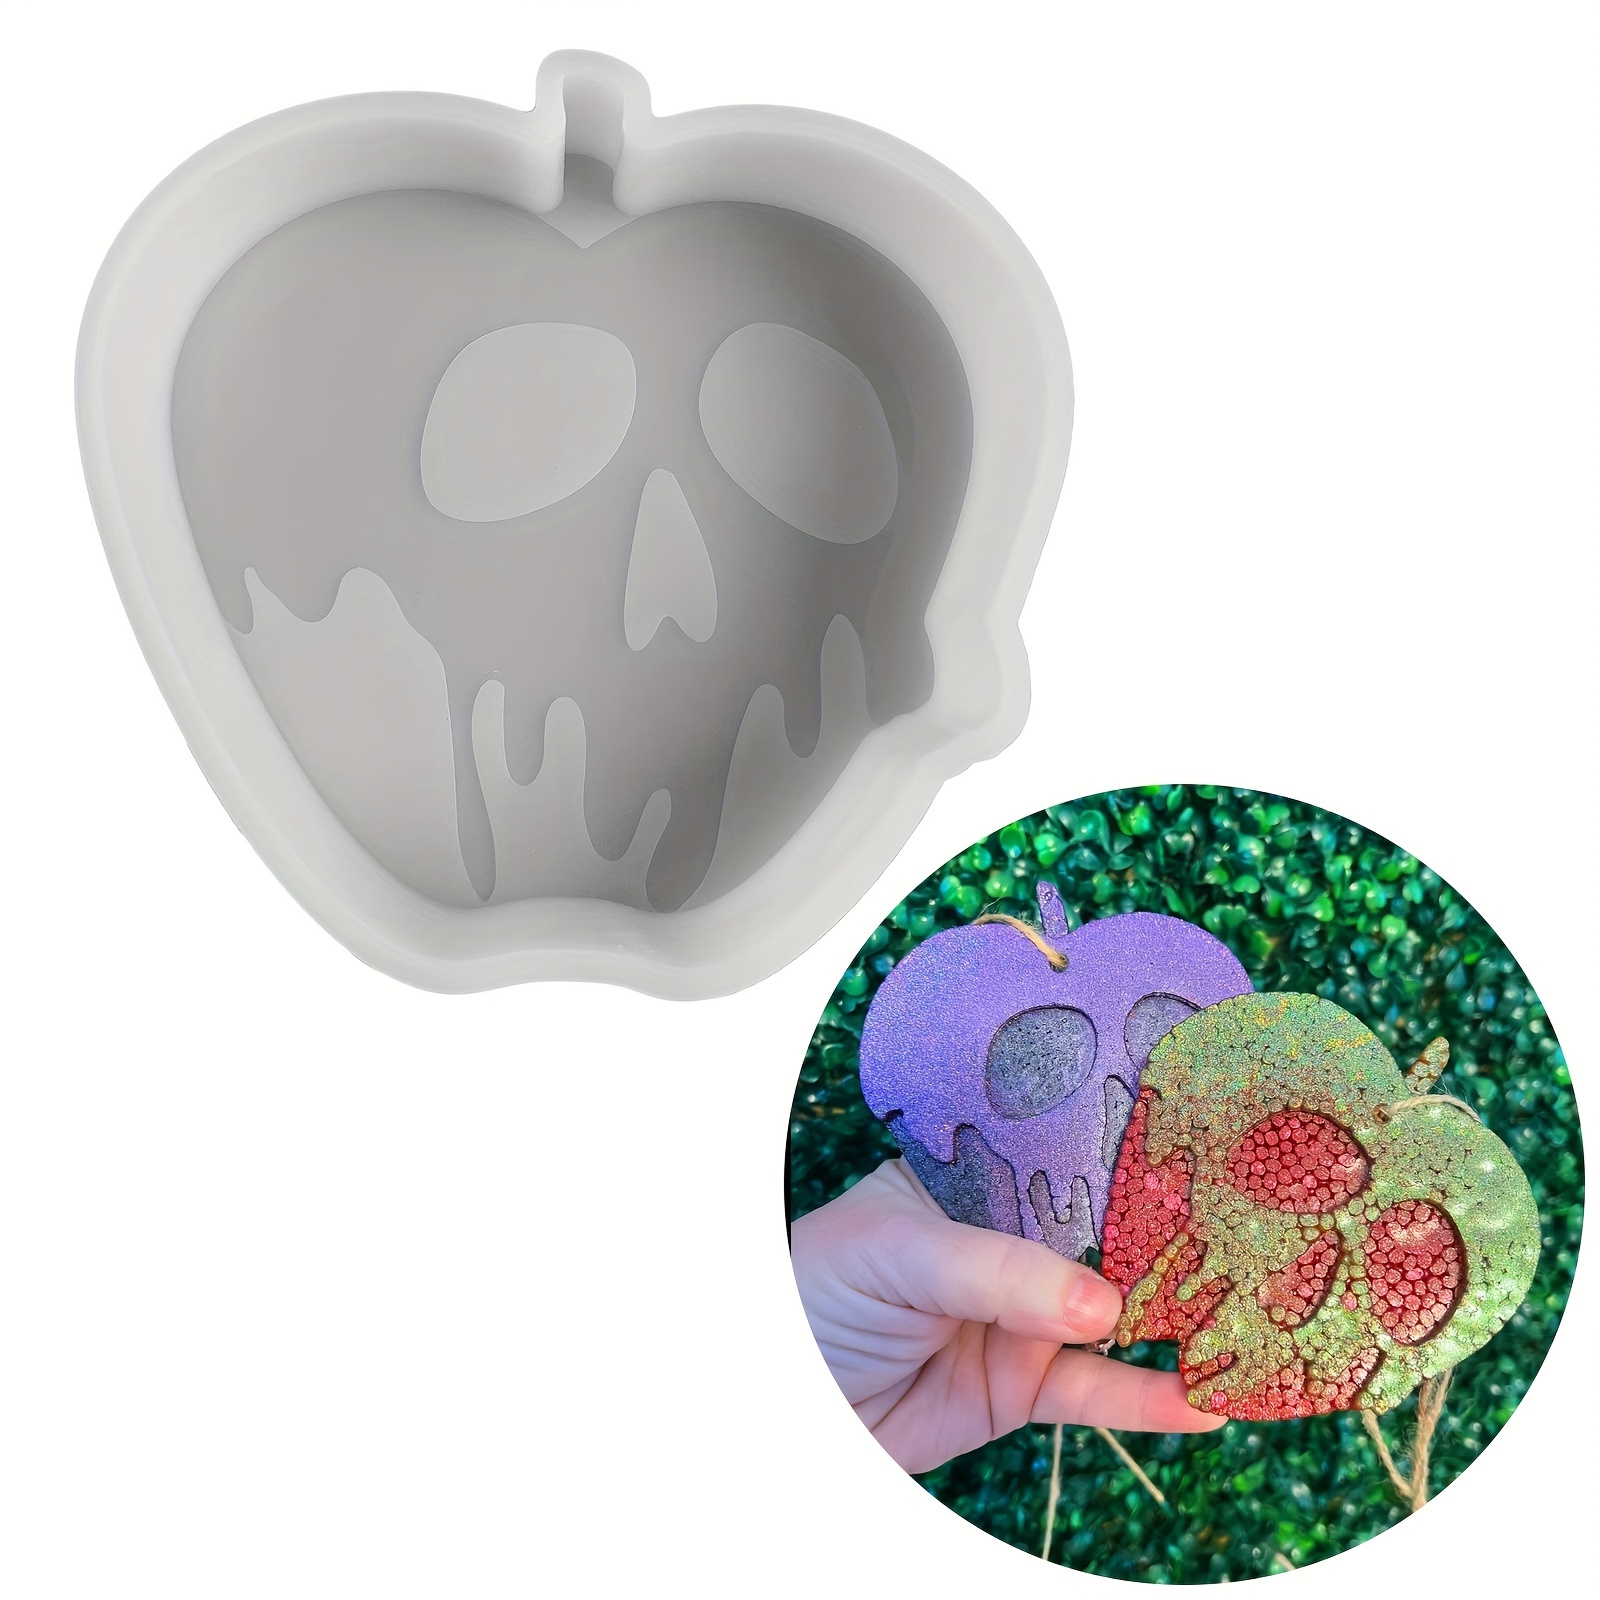 Halloween ghost Freshie Molds,Silicone Molds for Freshies,Car